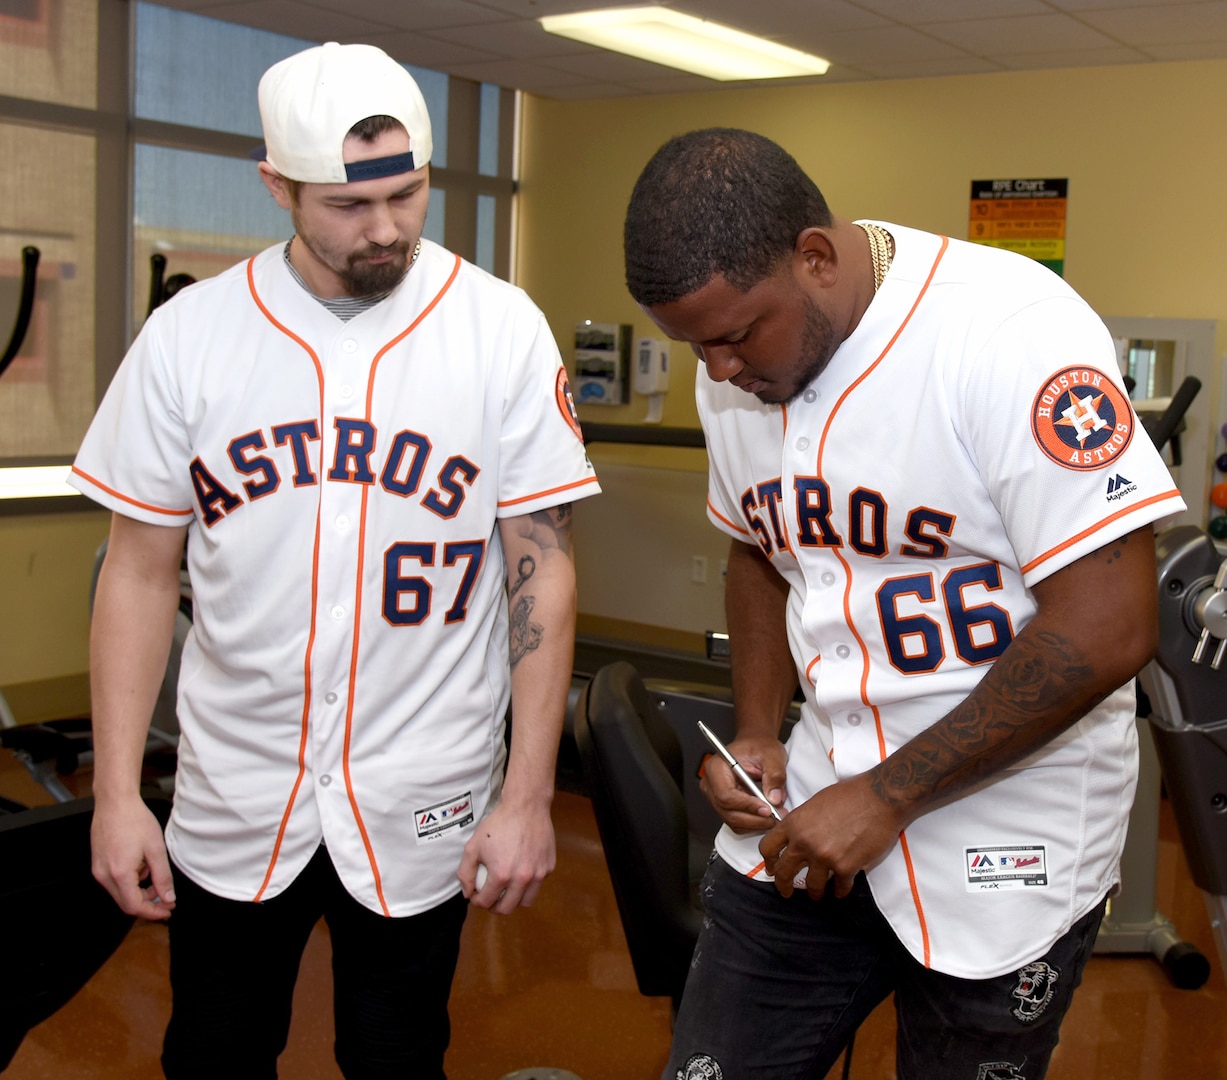 Houston Astros pitchers visit U.S. Army Institute of Surgical